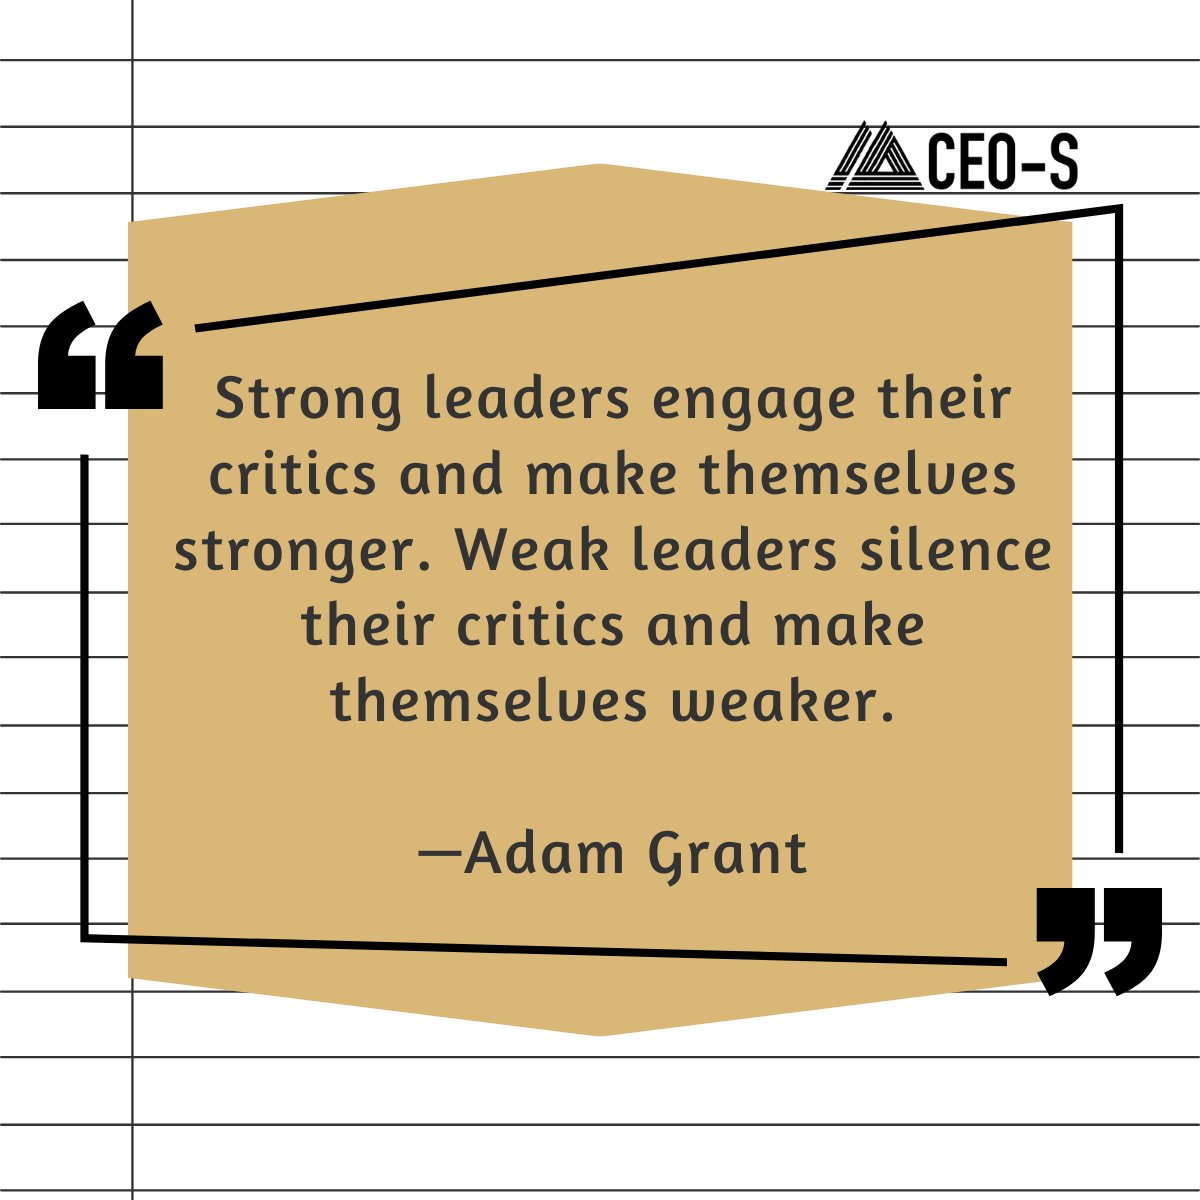 Engaging with critics strengthens leaders, while silencing them reveals weakness. Embrace feedback for growth. #LeadershipStrength #FeedbackIsFuel